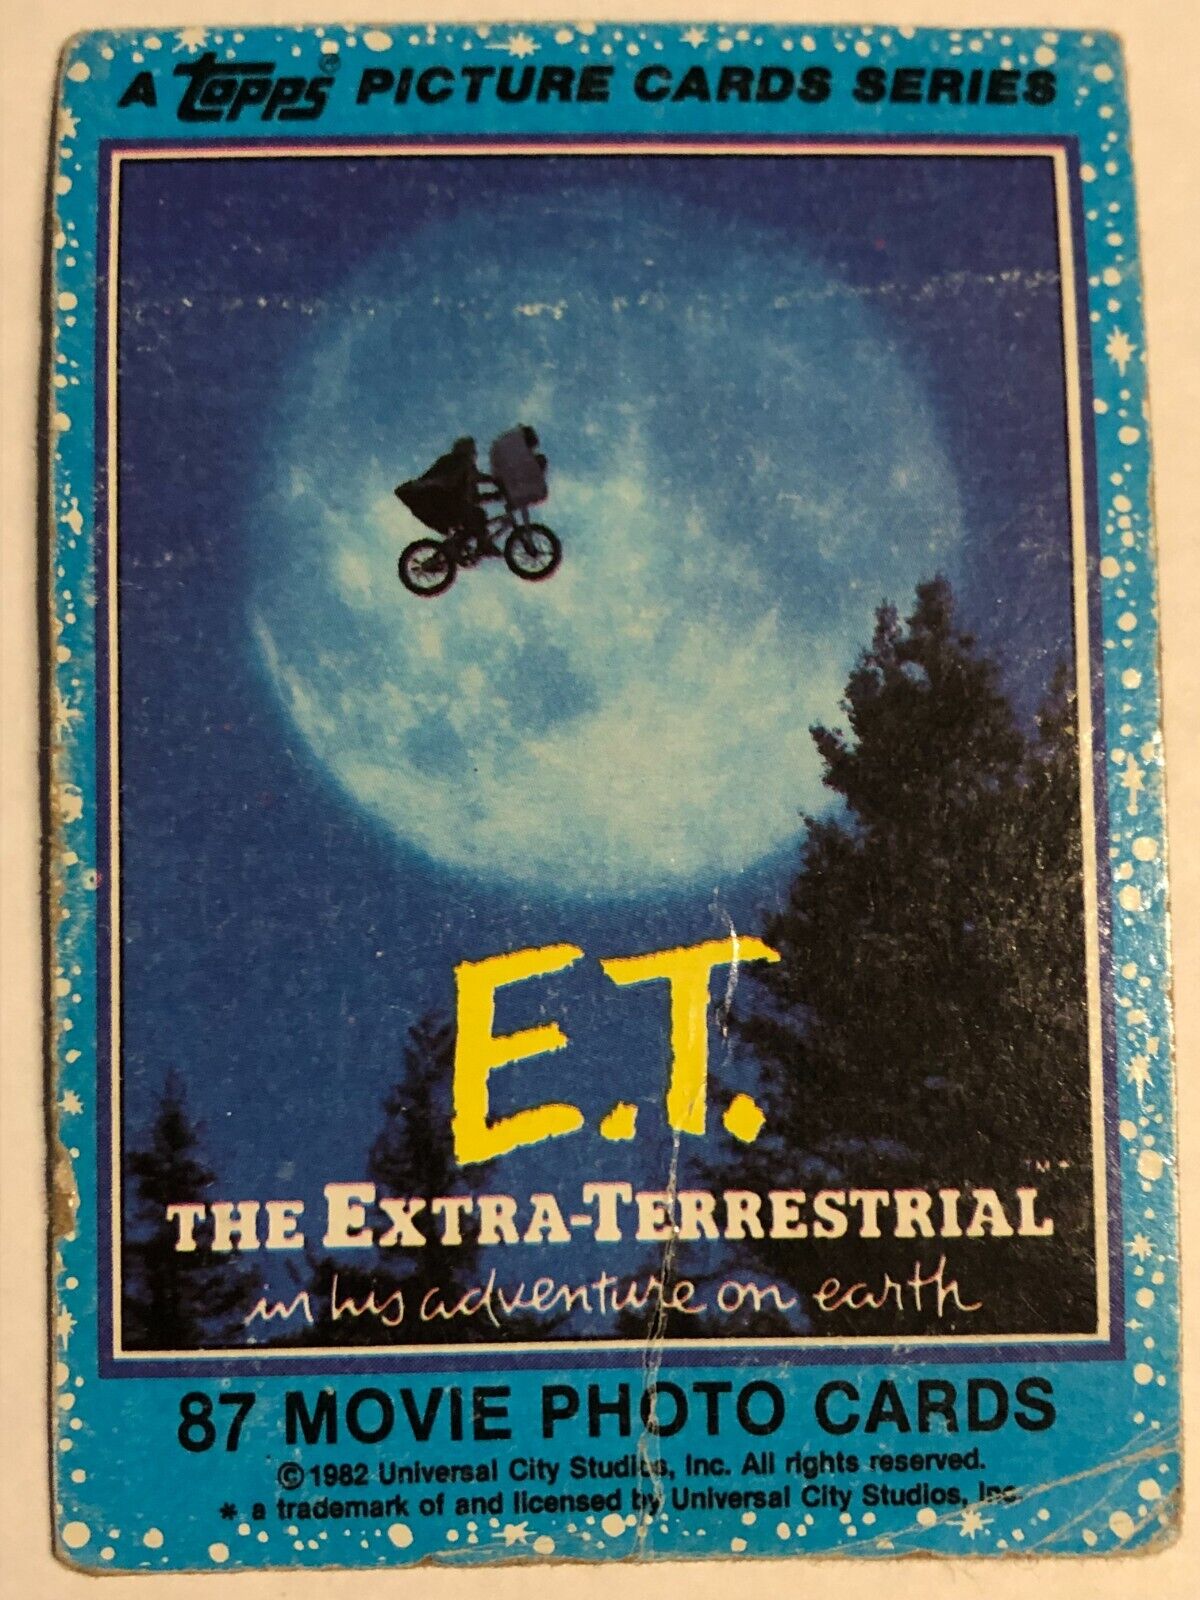 Topps 1982 E.T. The Extra-Terrestrial Trading Card #1 INTRODUCTION